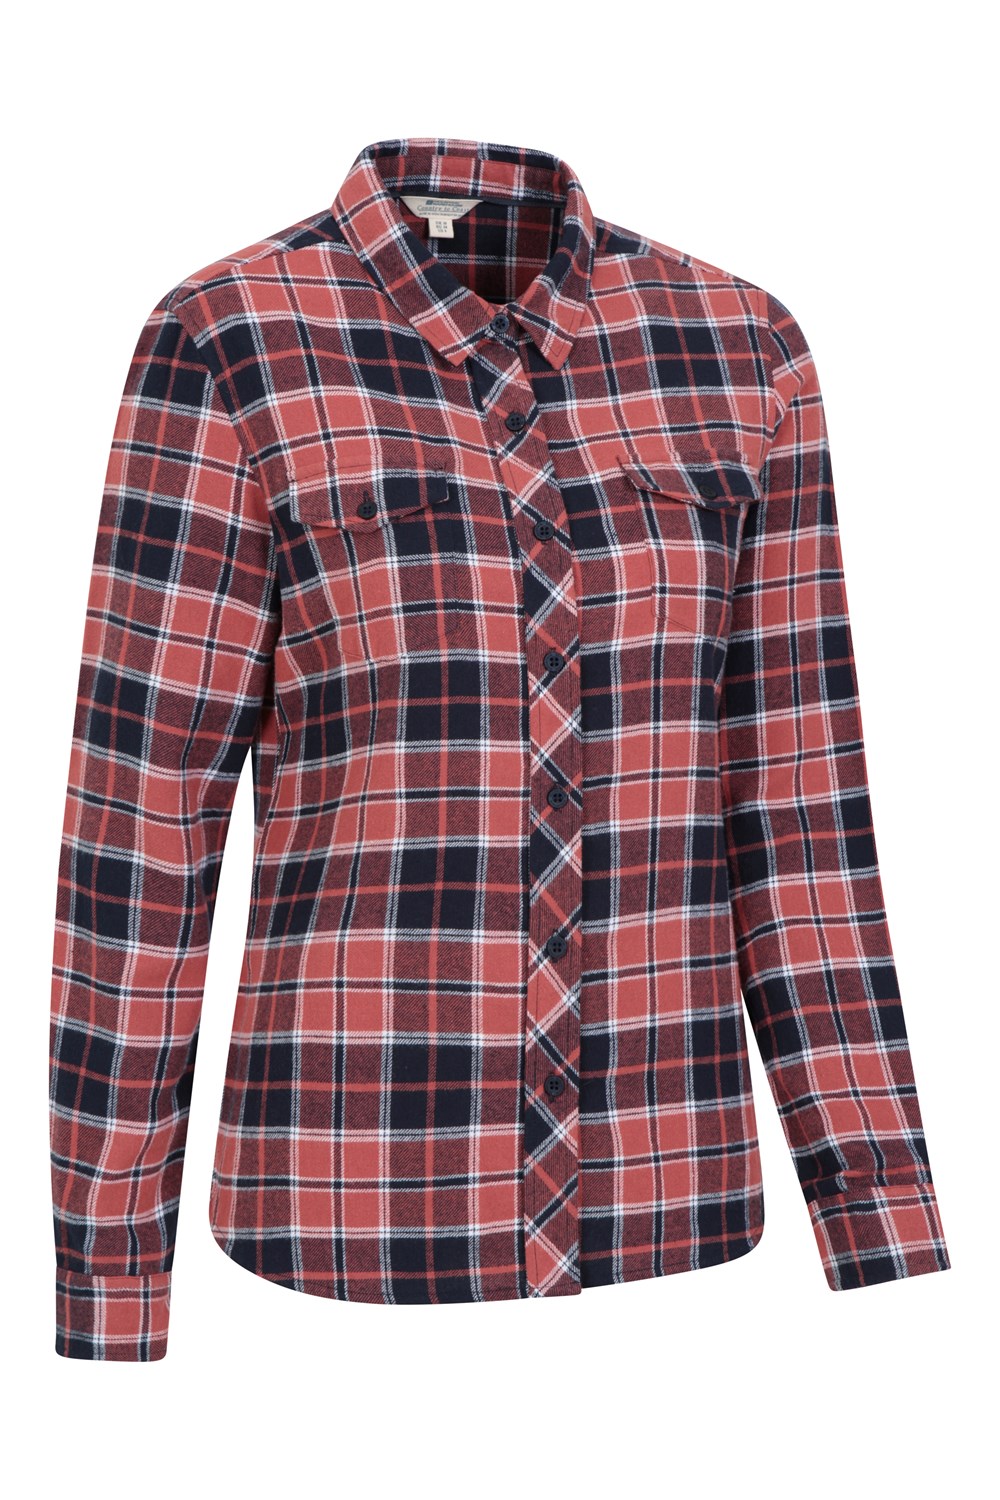 Mountain Warehouse Womens Willow Brushed Flannel Shirt Ladies ...